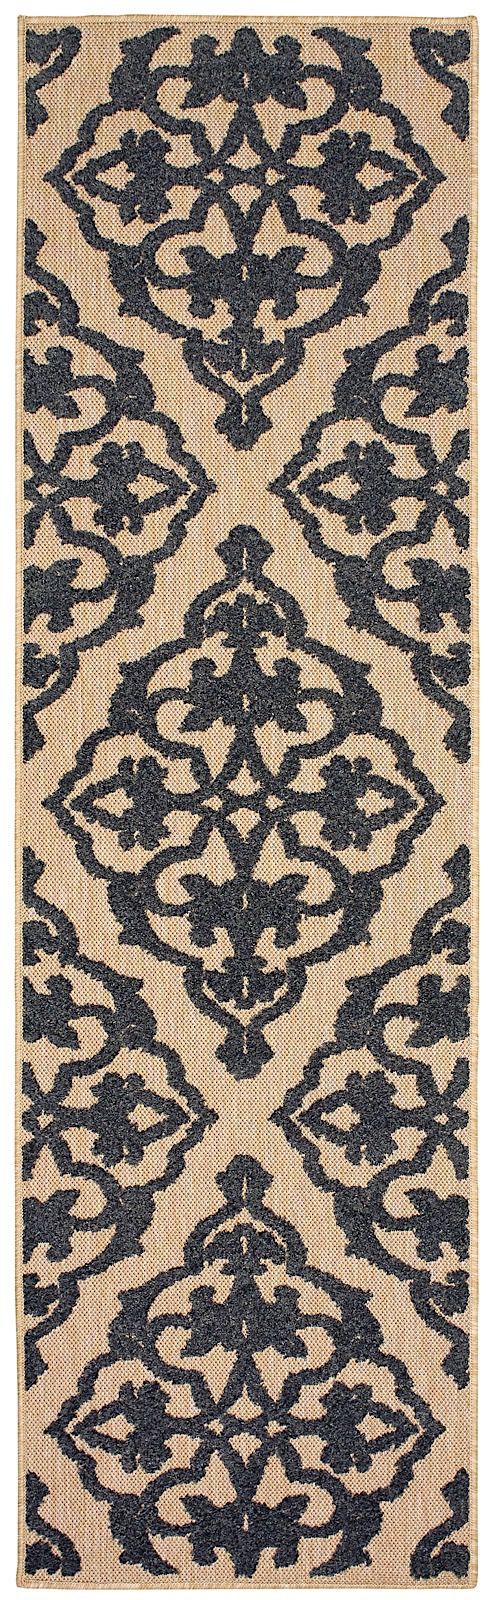 oriental weavers cayman country & floral area rug collection